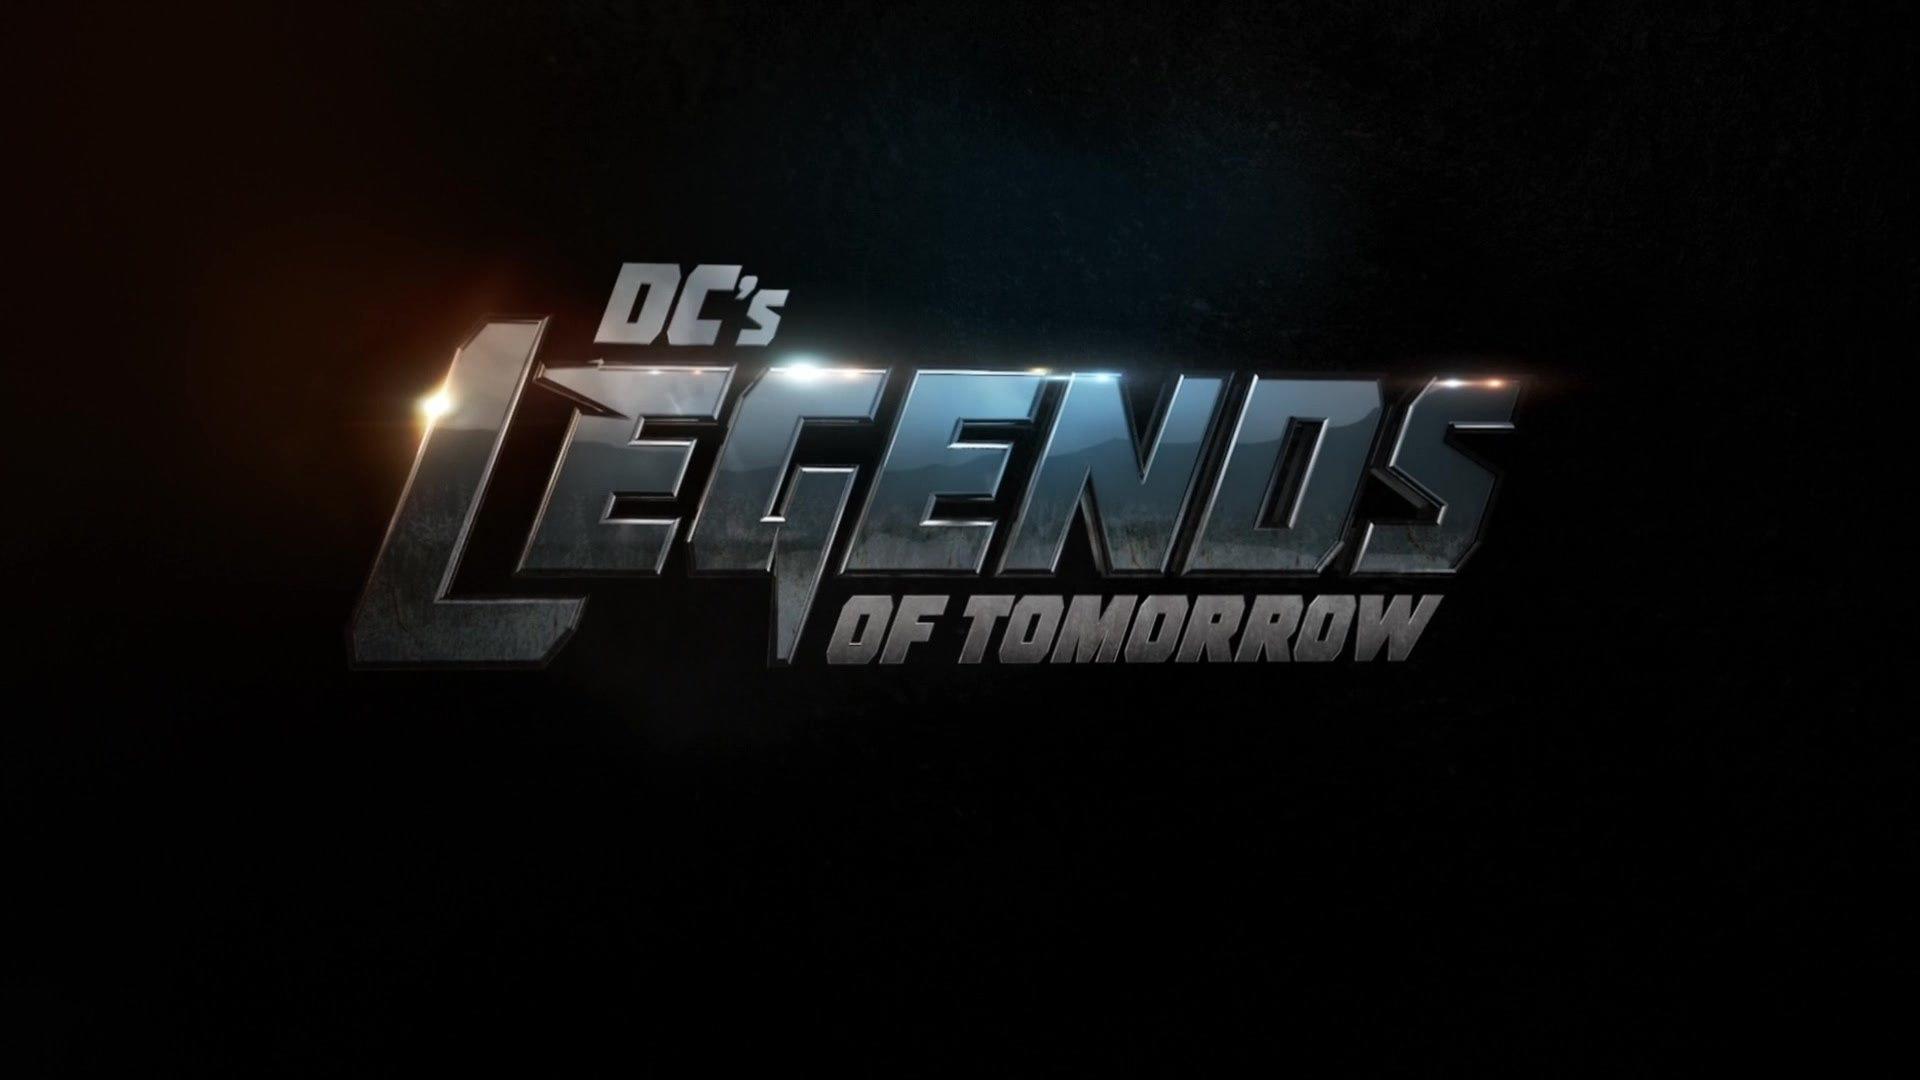 DC's Legends of Tomorrow (TV Series) Episode: Star City 2046